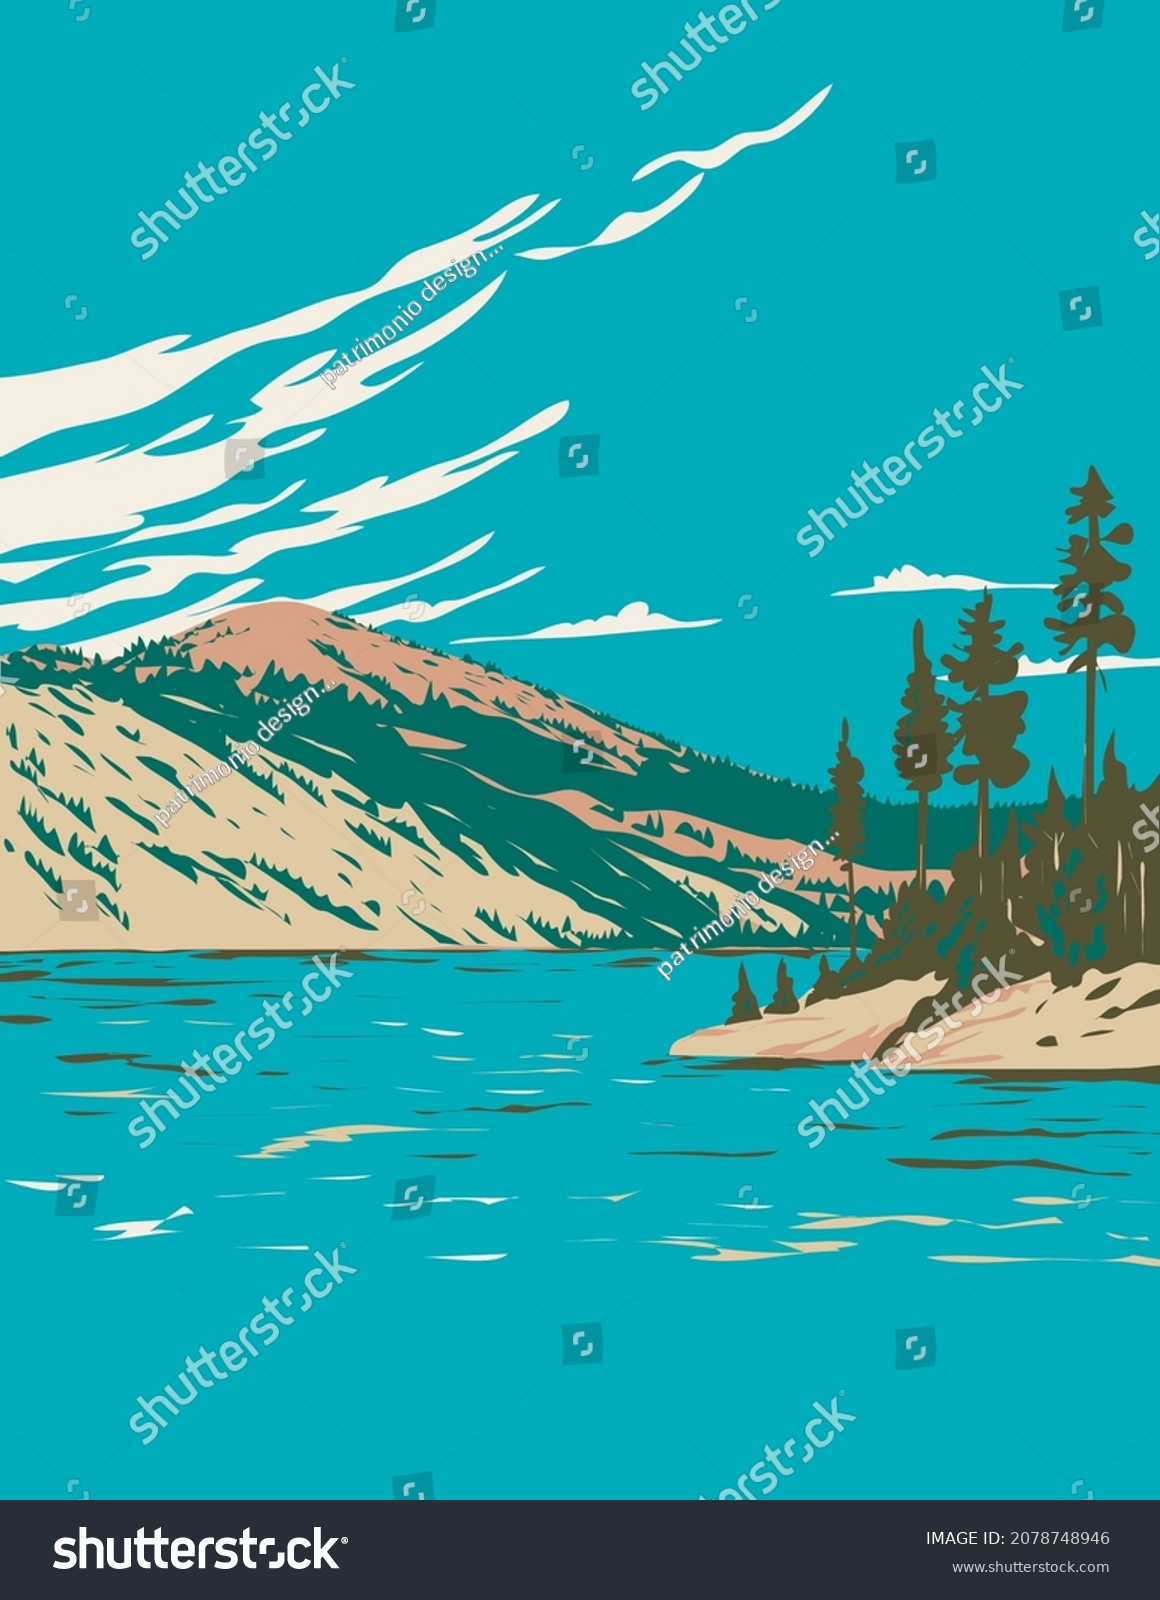 SVG of WPA poster art of Lake Tahoe-Nevada State Park with Marlette Lake and Hobart Reservoir located in Nevada, United States of America USA done in works project administration style. svg